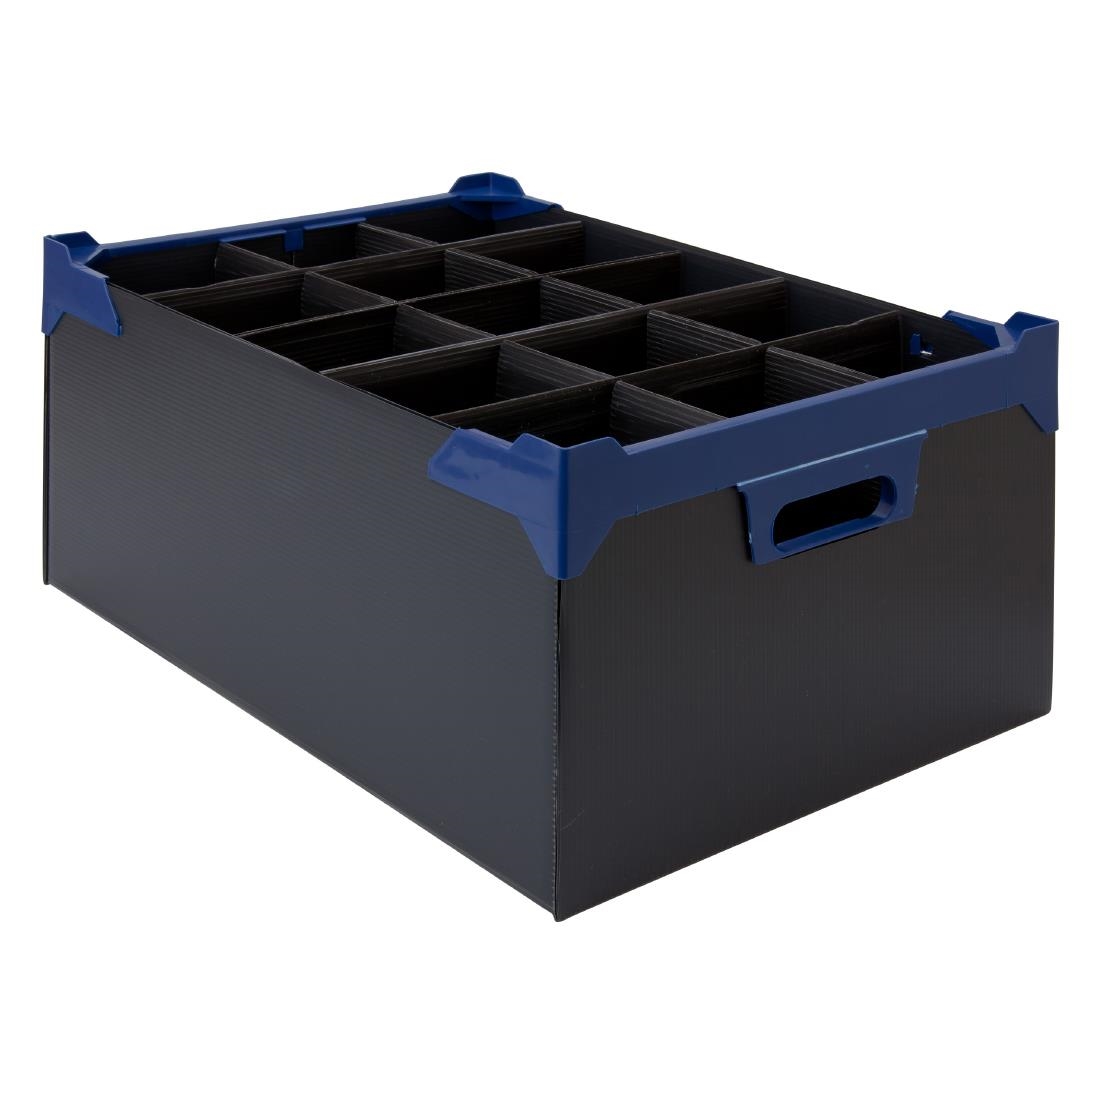 Beaumont Pint Glass Carry Box 500x345x200mm Pack of 5 (CZ622)